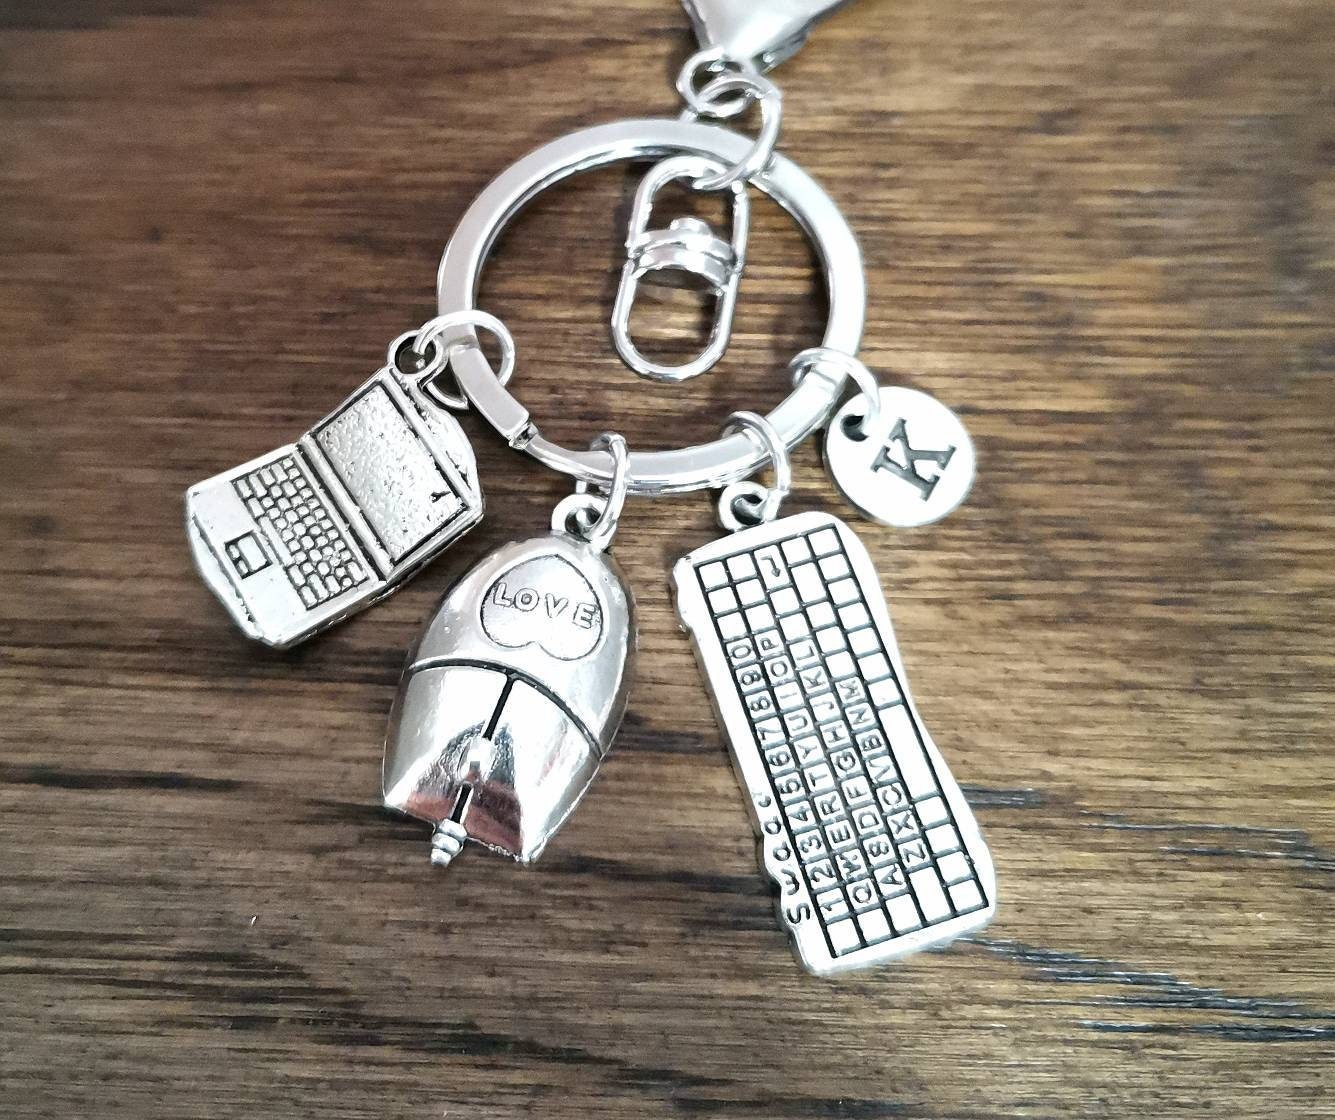 Computer Science Gift, Computing Gift,Laptop charm, Secretary, Administrator, Geek Gift, Keyboard, Mouse, programmer, Engineer, Software